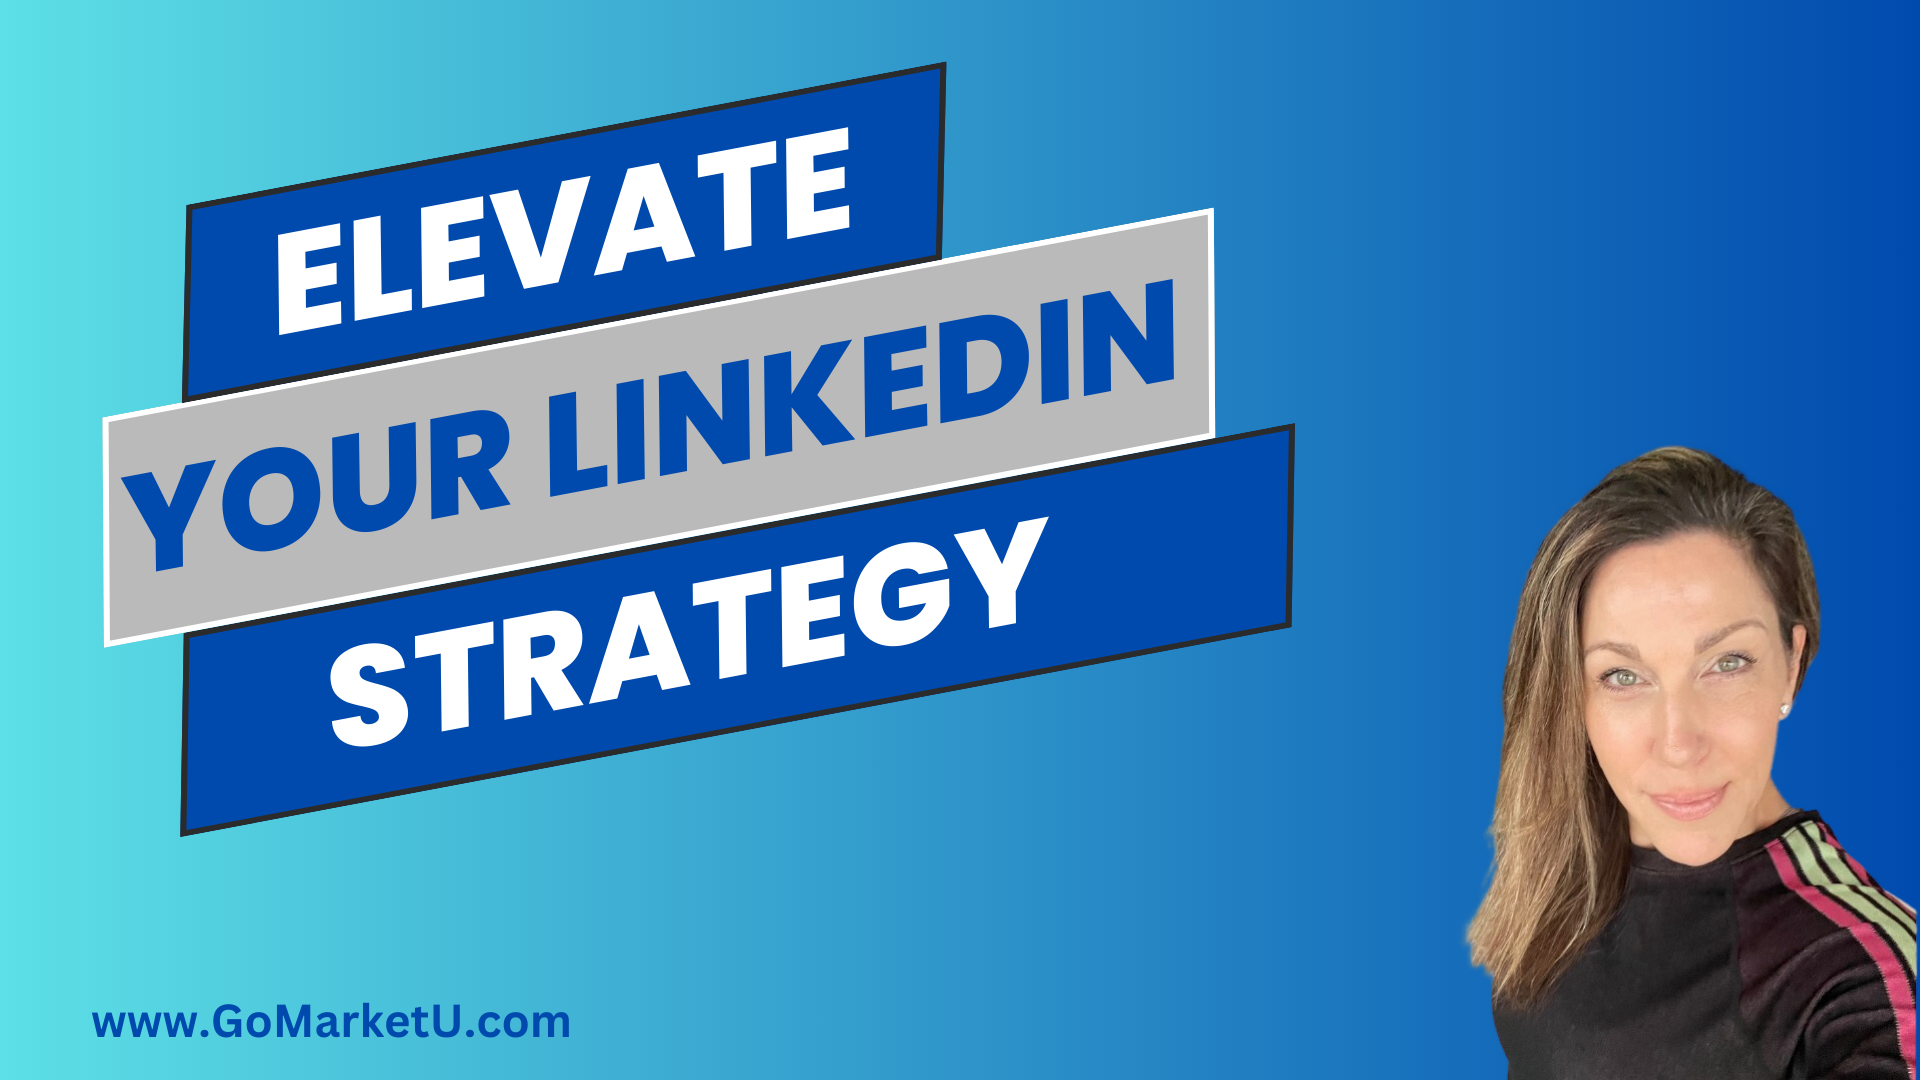 4 Tips to Elevate Your LinkedIn Strategy!